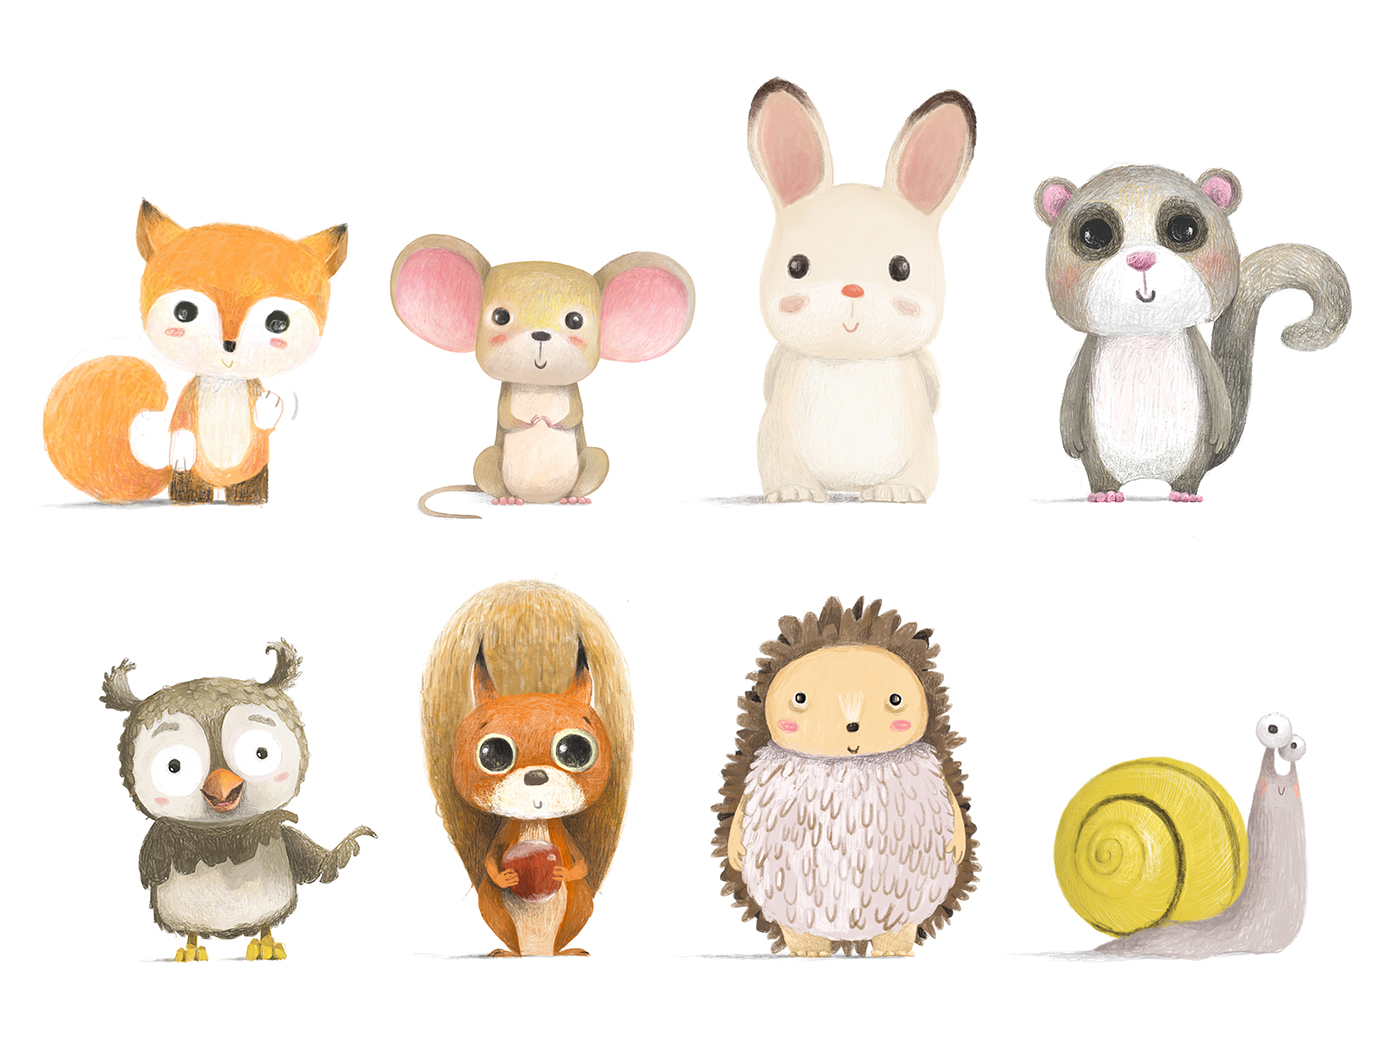 CUTE FOREST ANIMALS on Behance